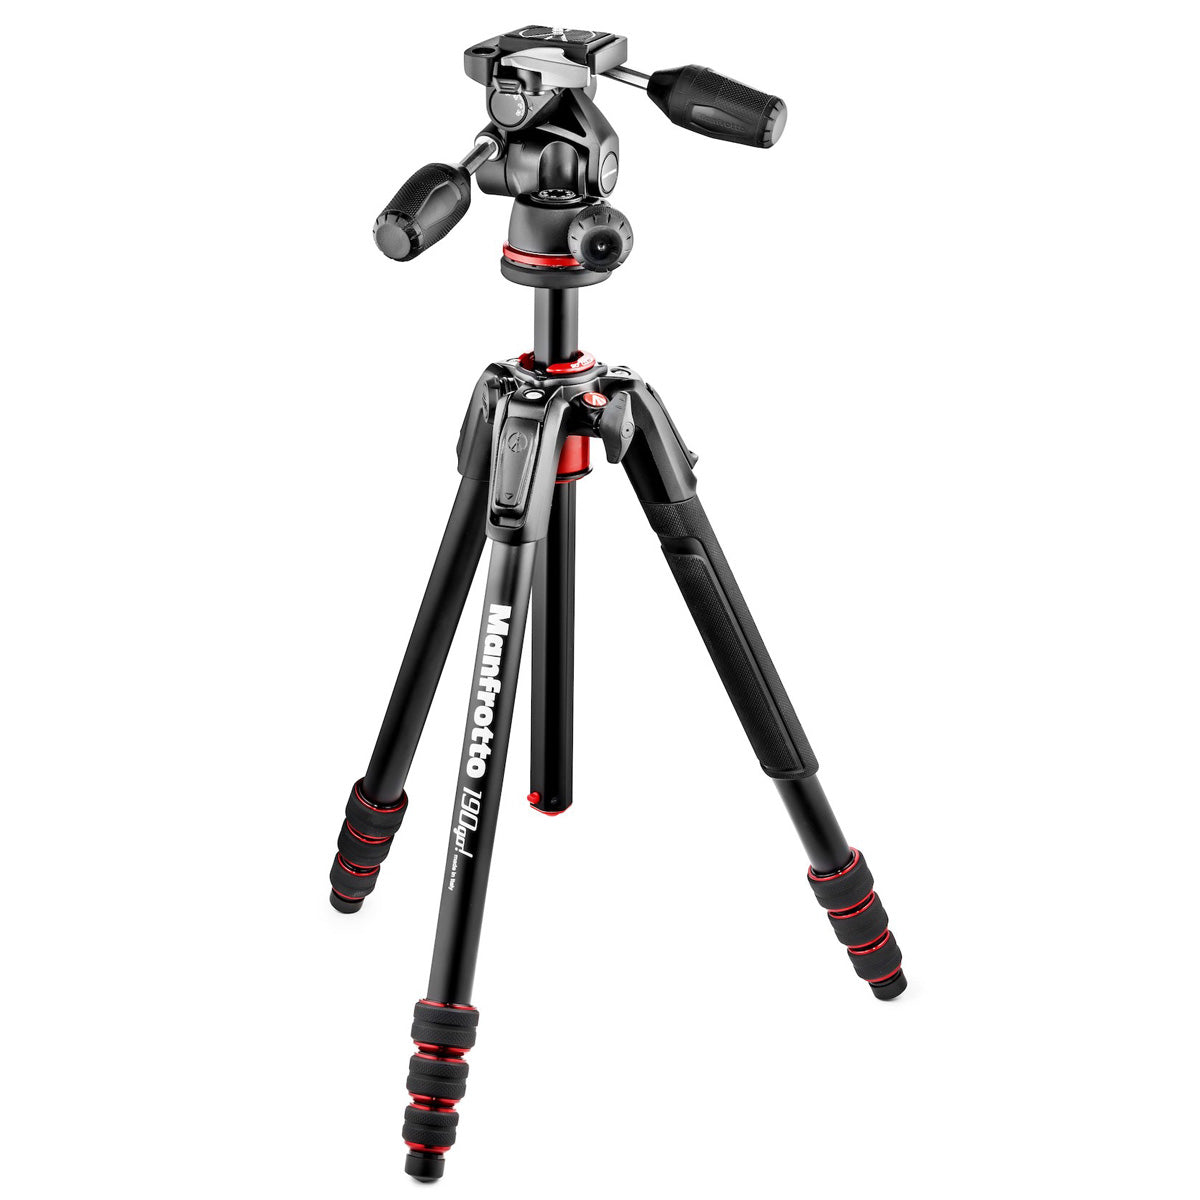 Manfrotto 190go! Aluminum 4 Section Tripod with 3 Way Head